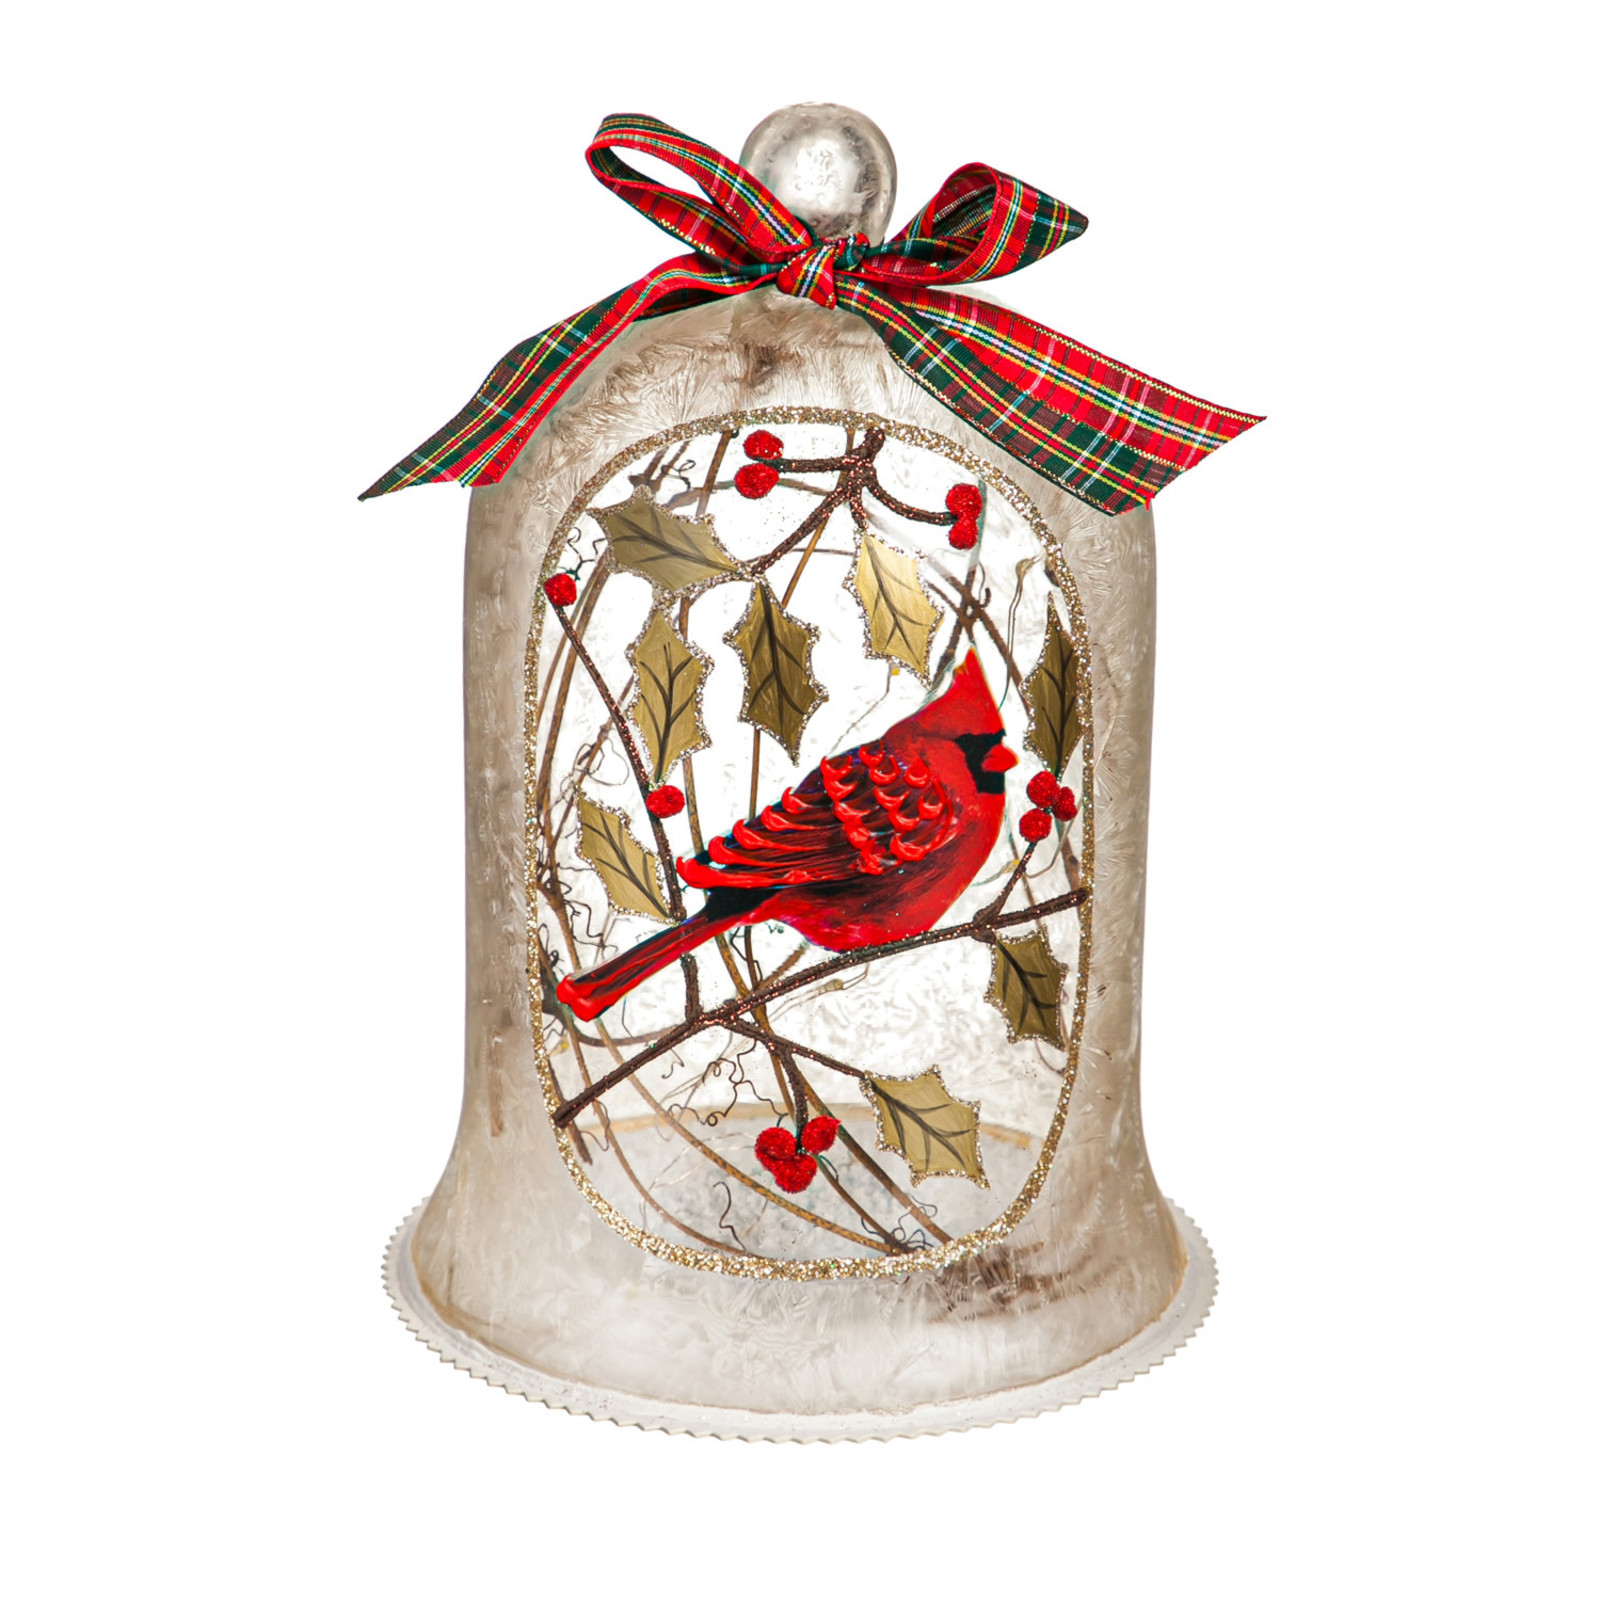 Evergreen Enterprises LED Glass Bell with Cardinal Table Décor    8LED859 loading=